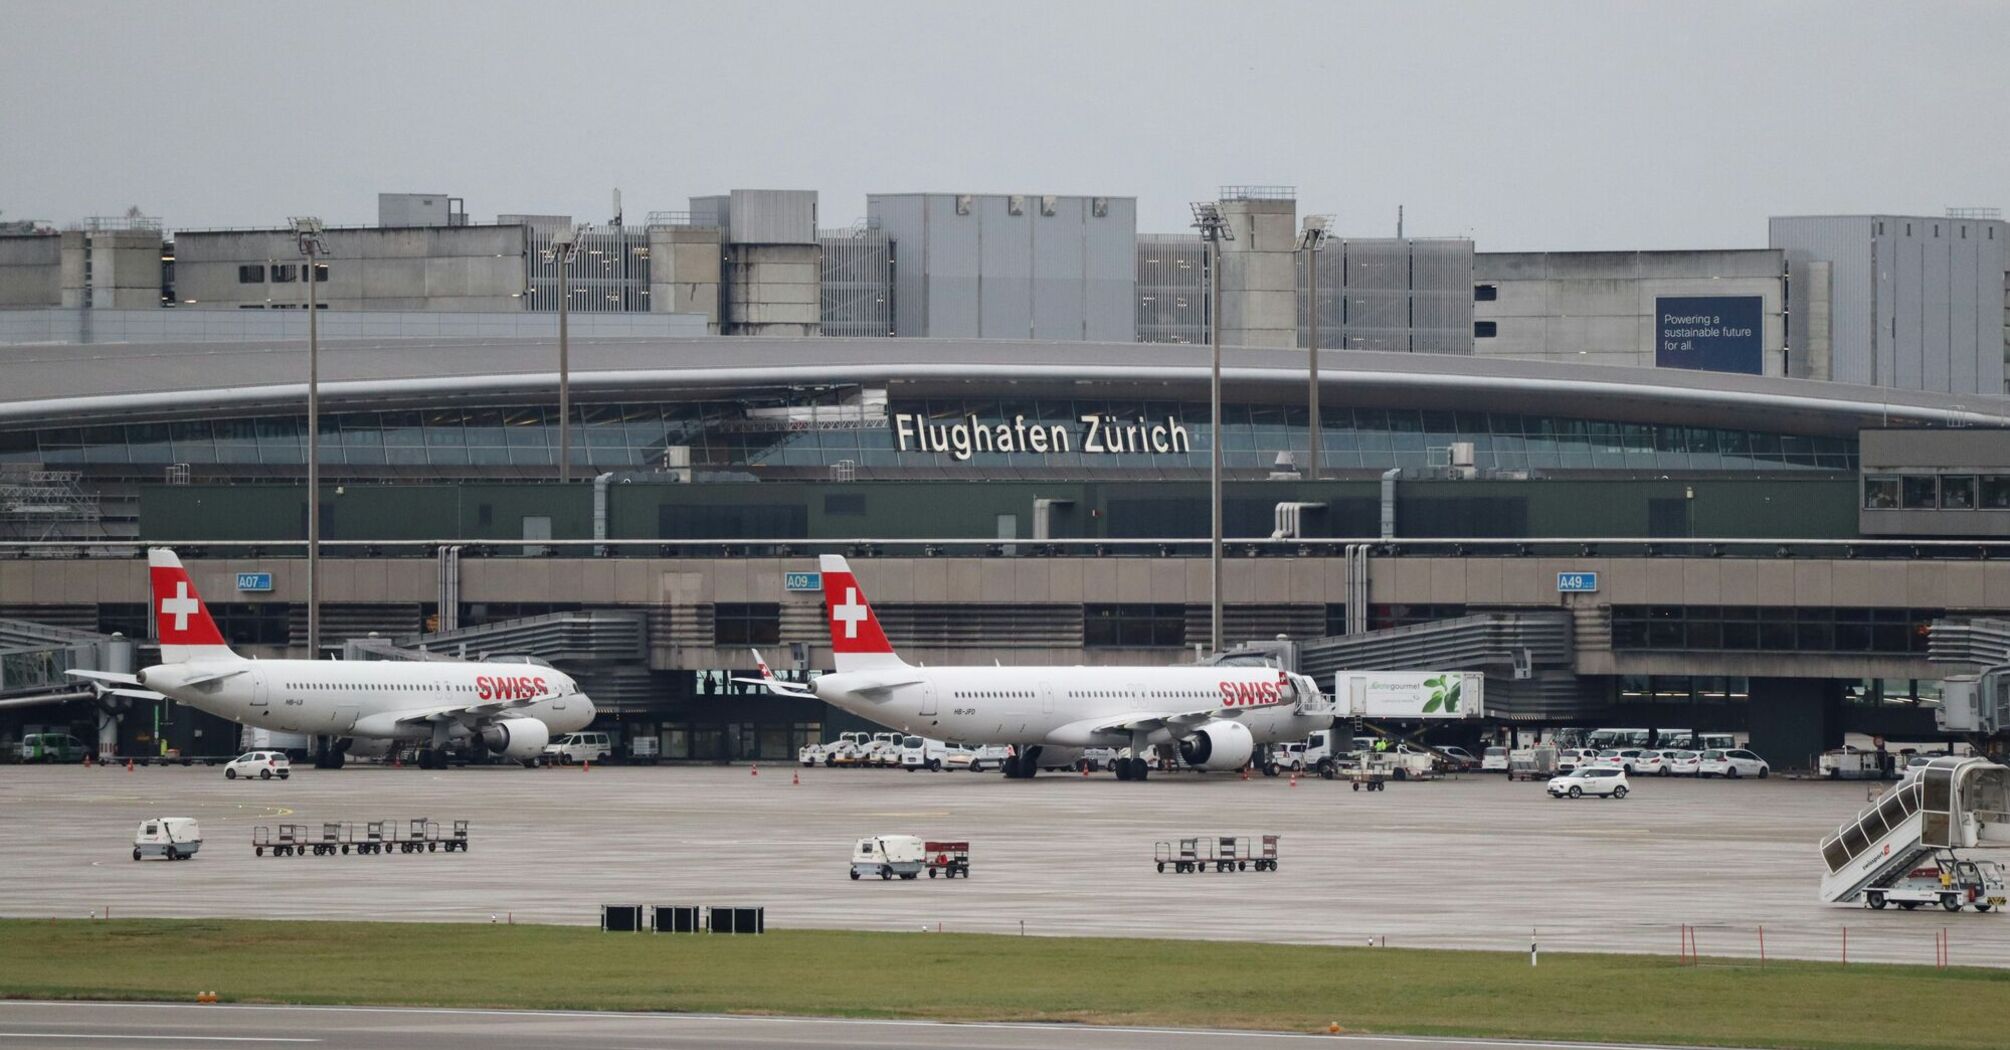 A couple of airplanes that are in Zurich Airport